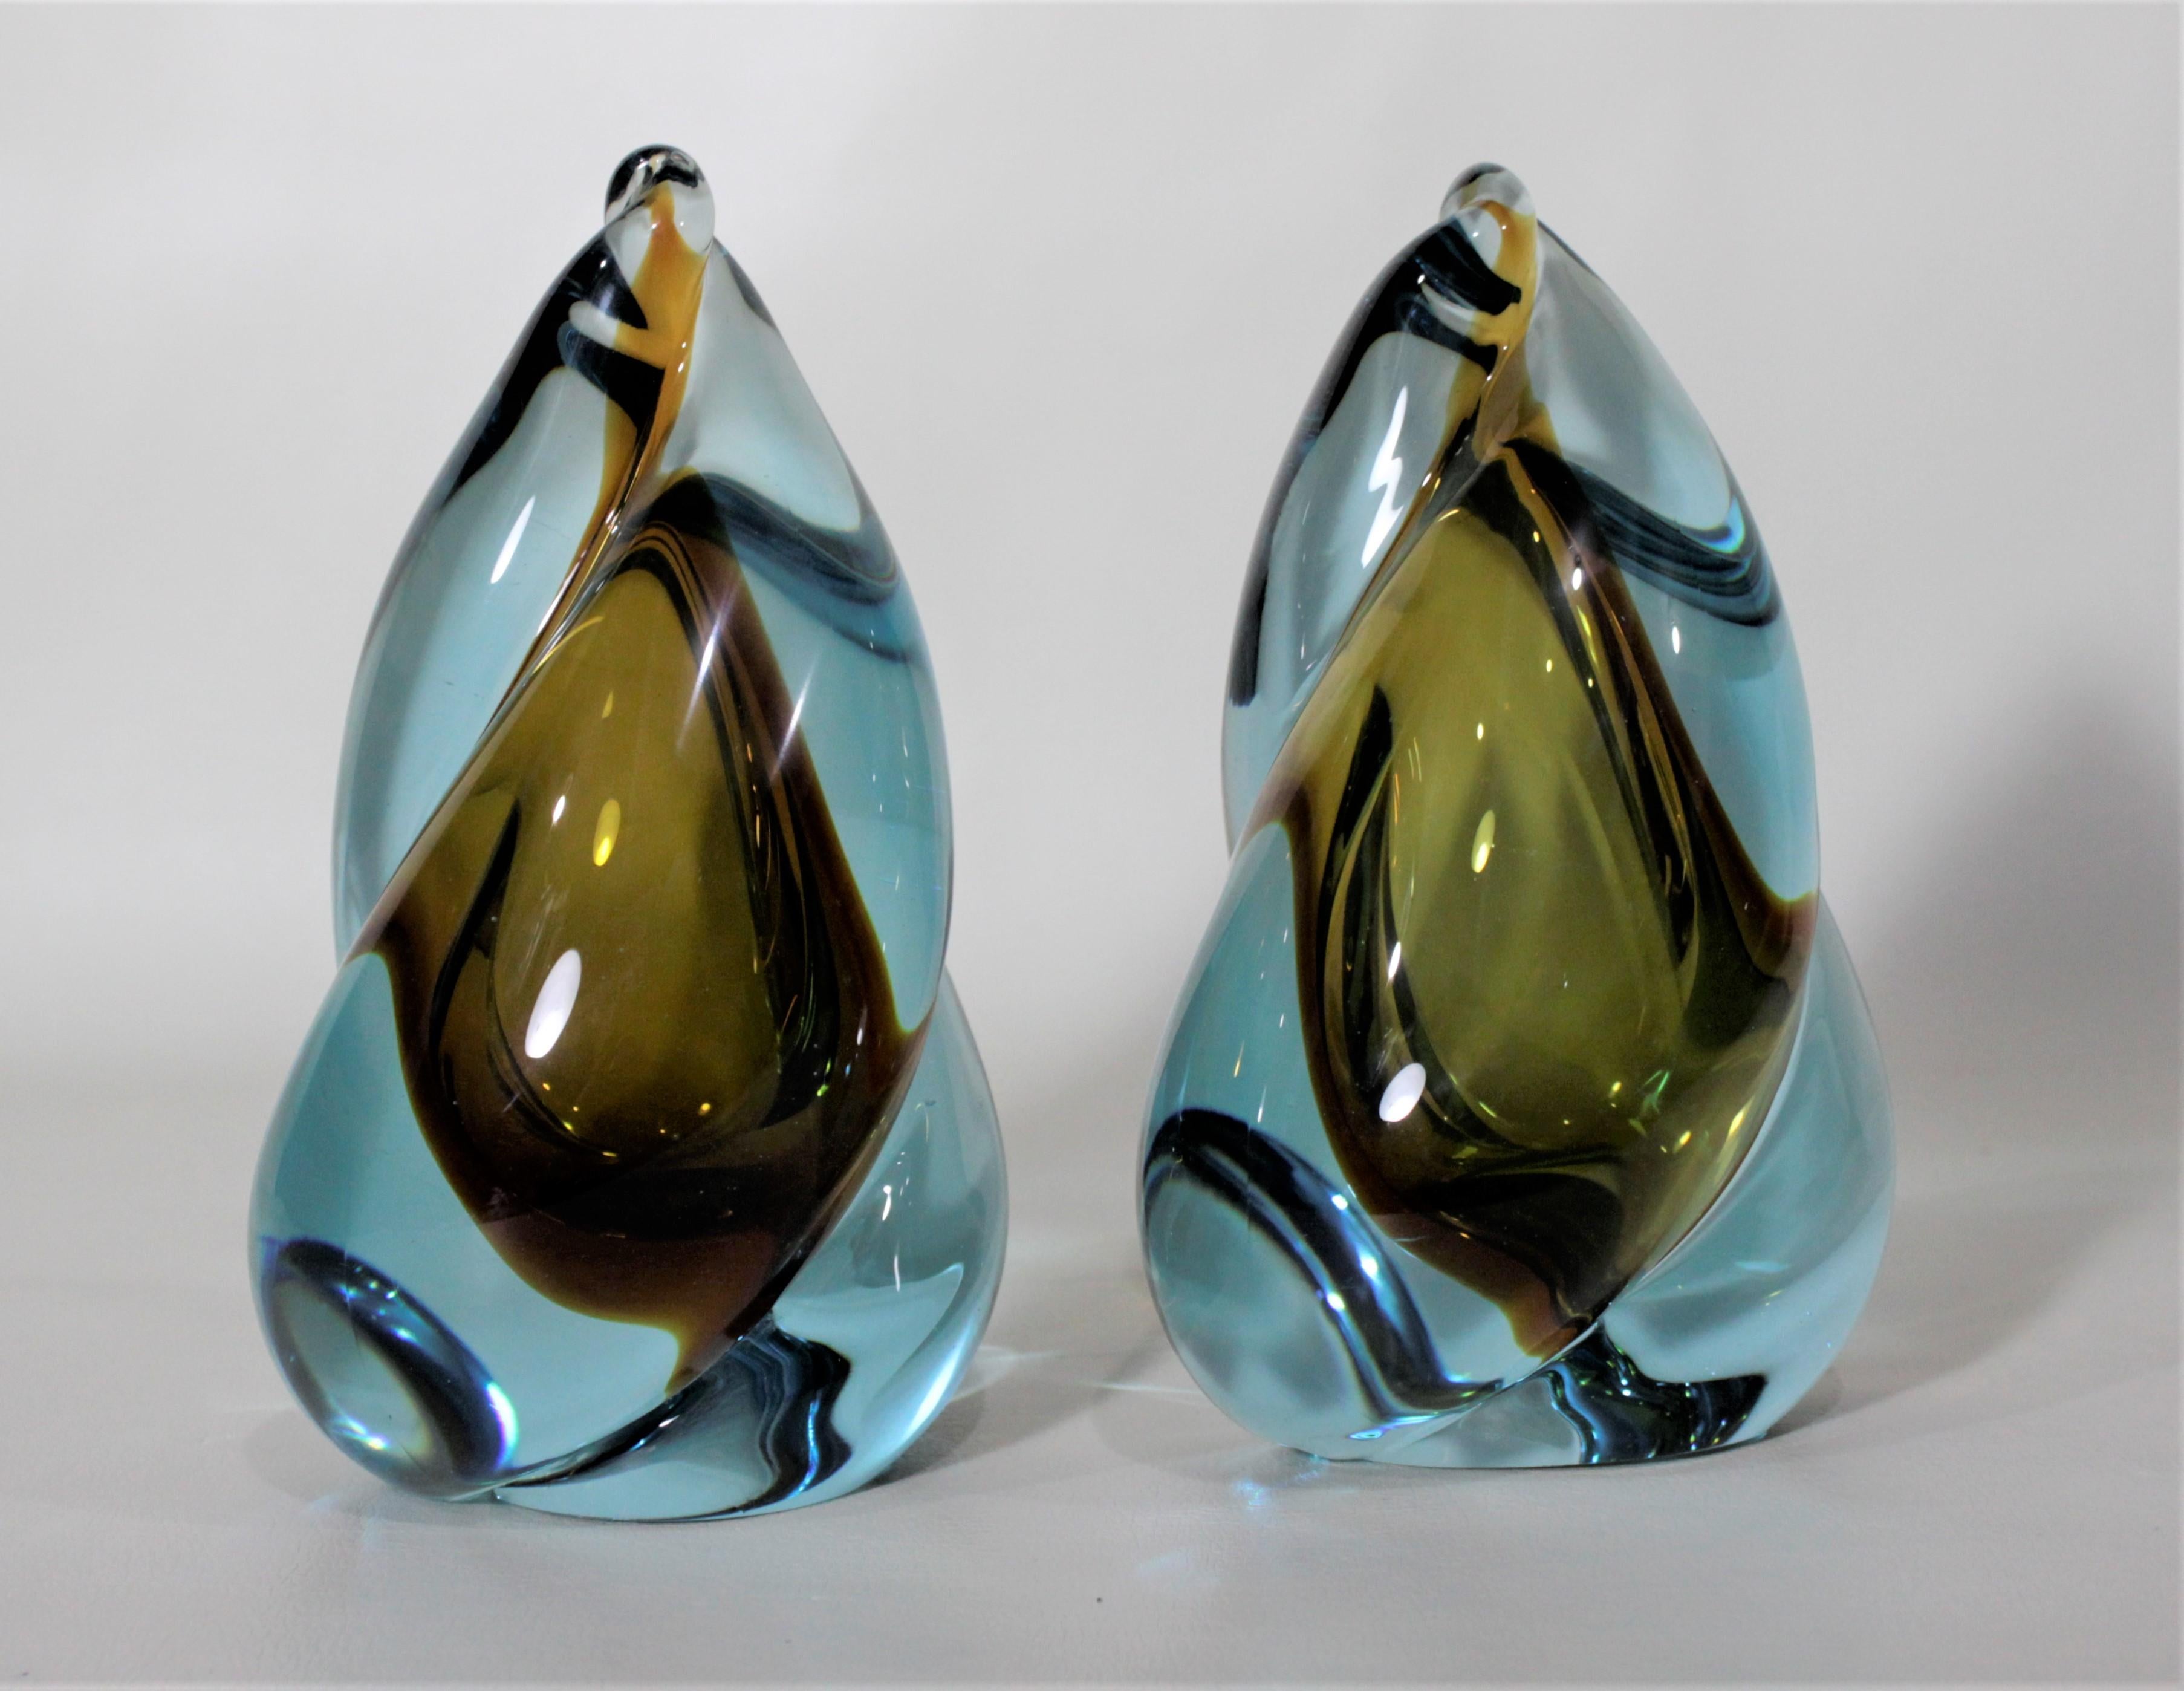 Hand-Crafted Pair of Mid-Century Modern Italian Murano Art Glass Bookends, Barbini Styled